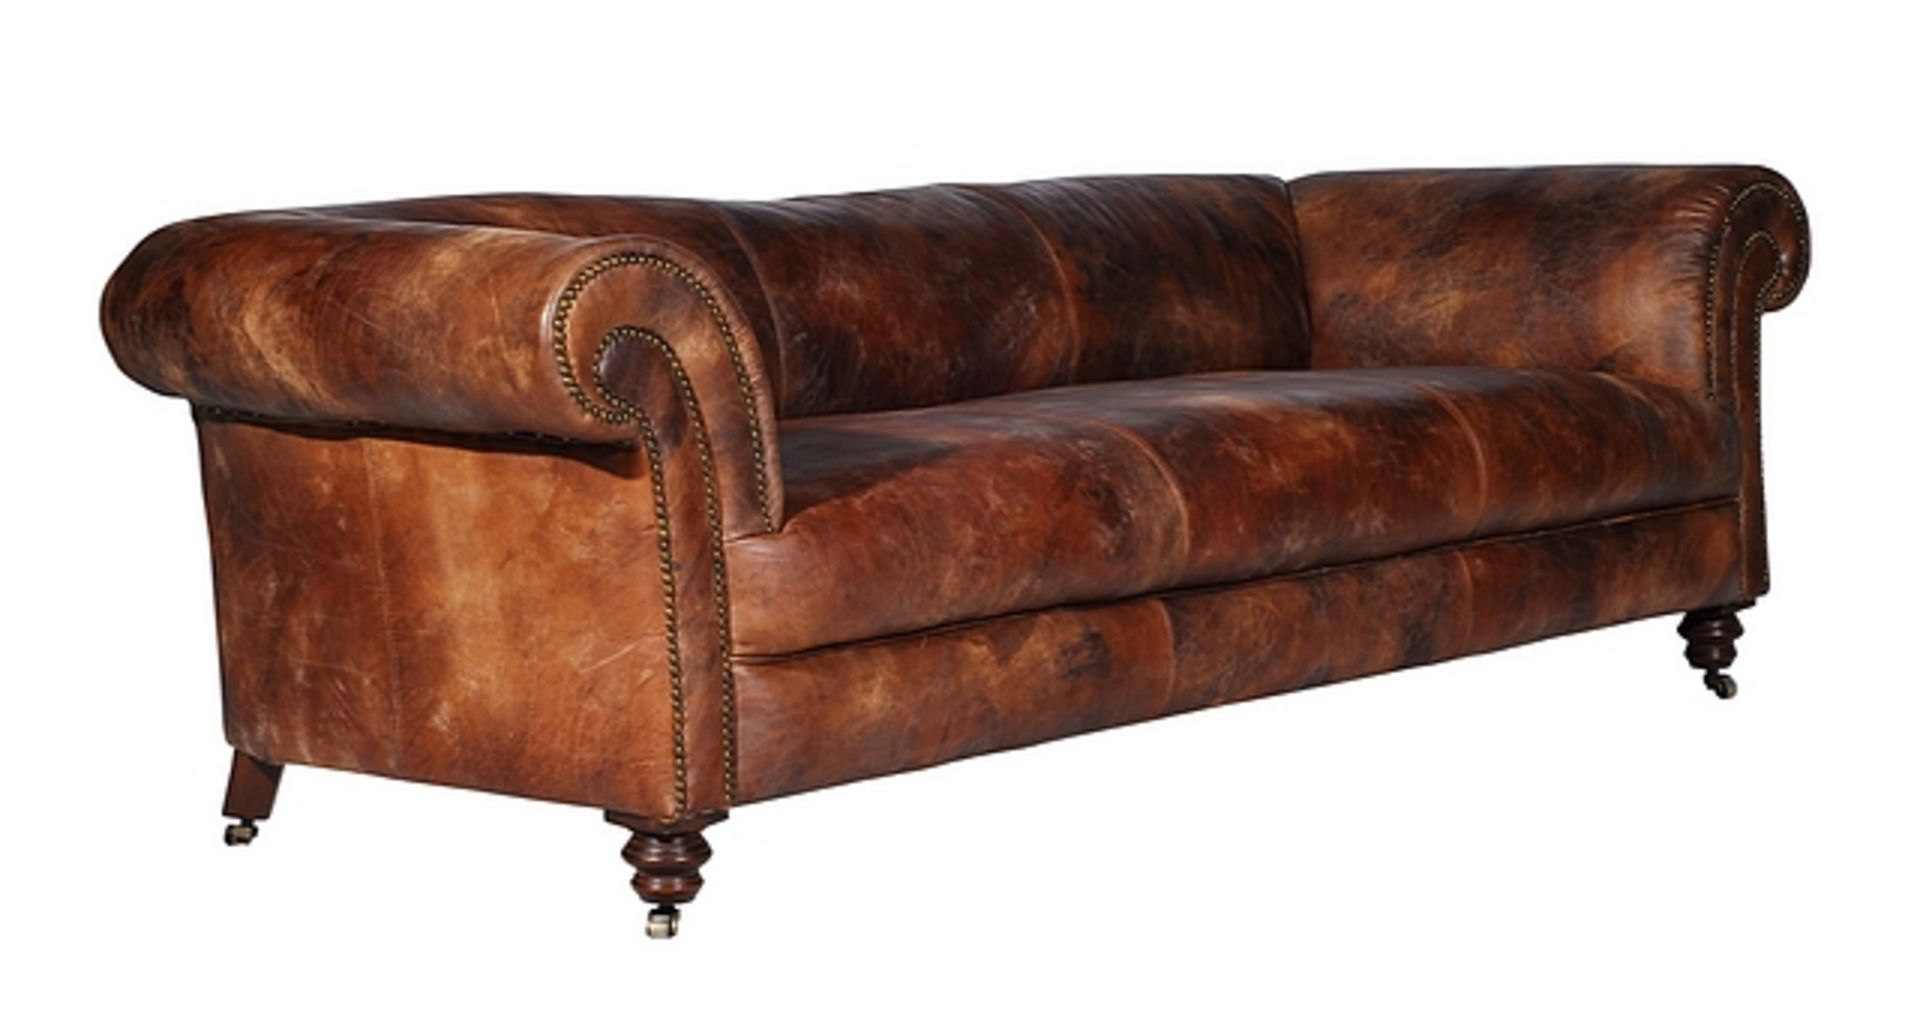 Old Grand Library Chesterfield 1 Straight Without Button Antique Whisky 123 X 100 X 72cm